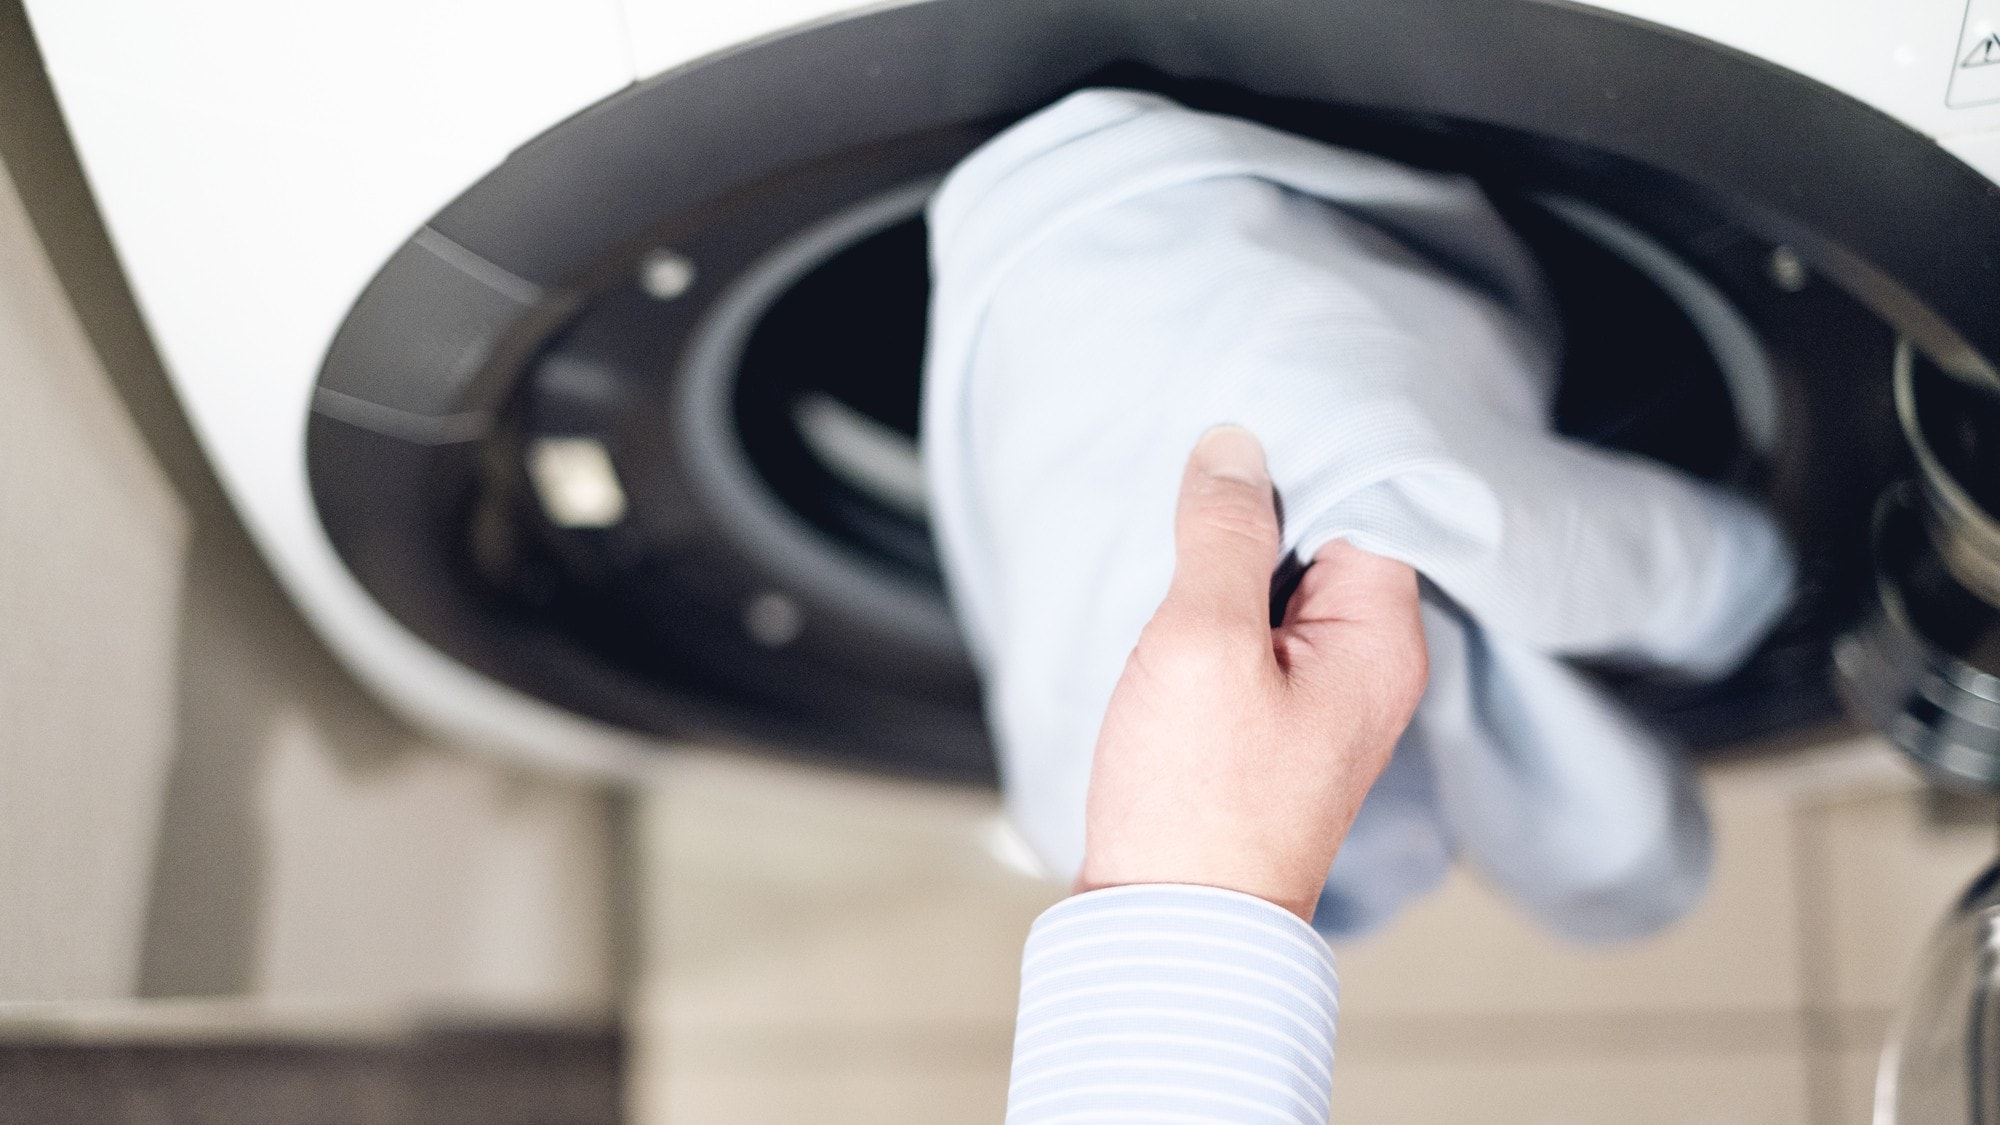 If you wash and dry your favorite clothes, you don't have to carry a change of clothes.